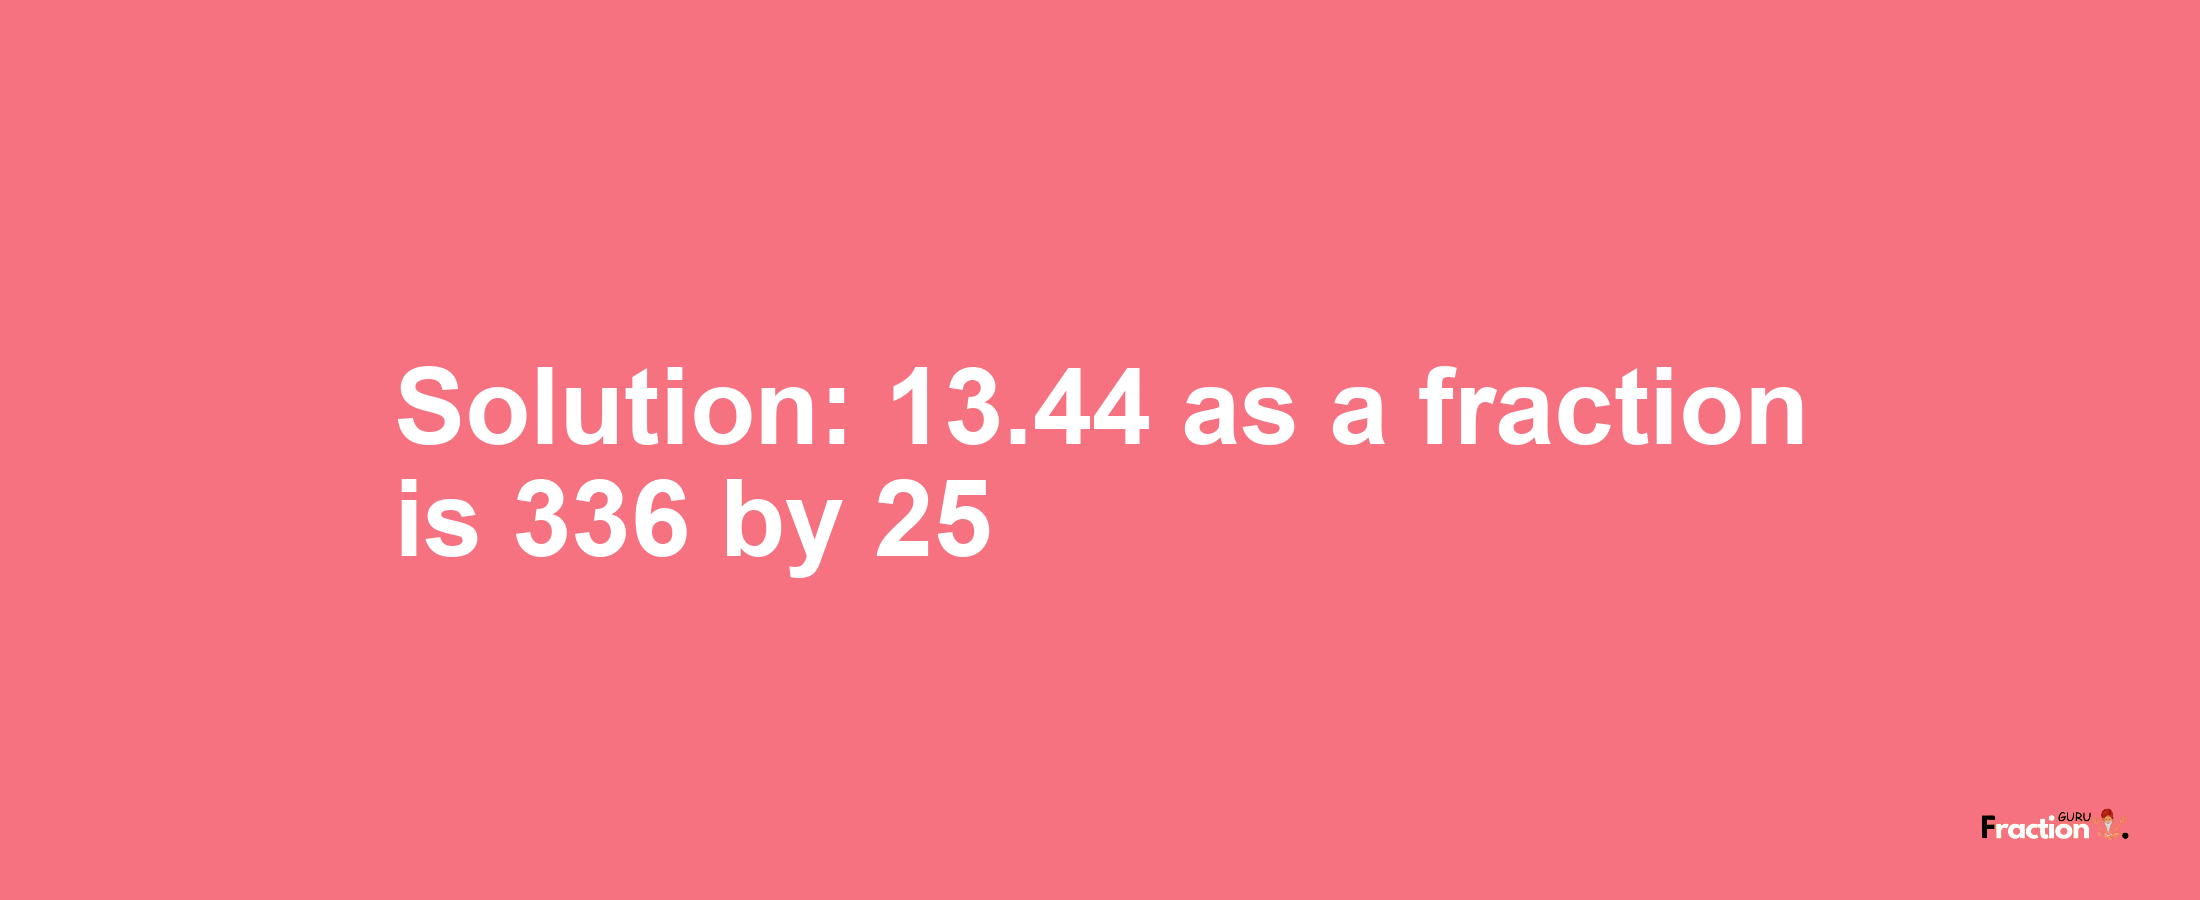 Solution:13.44 as a fraction is 336/25